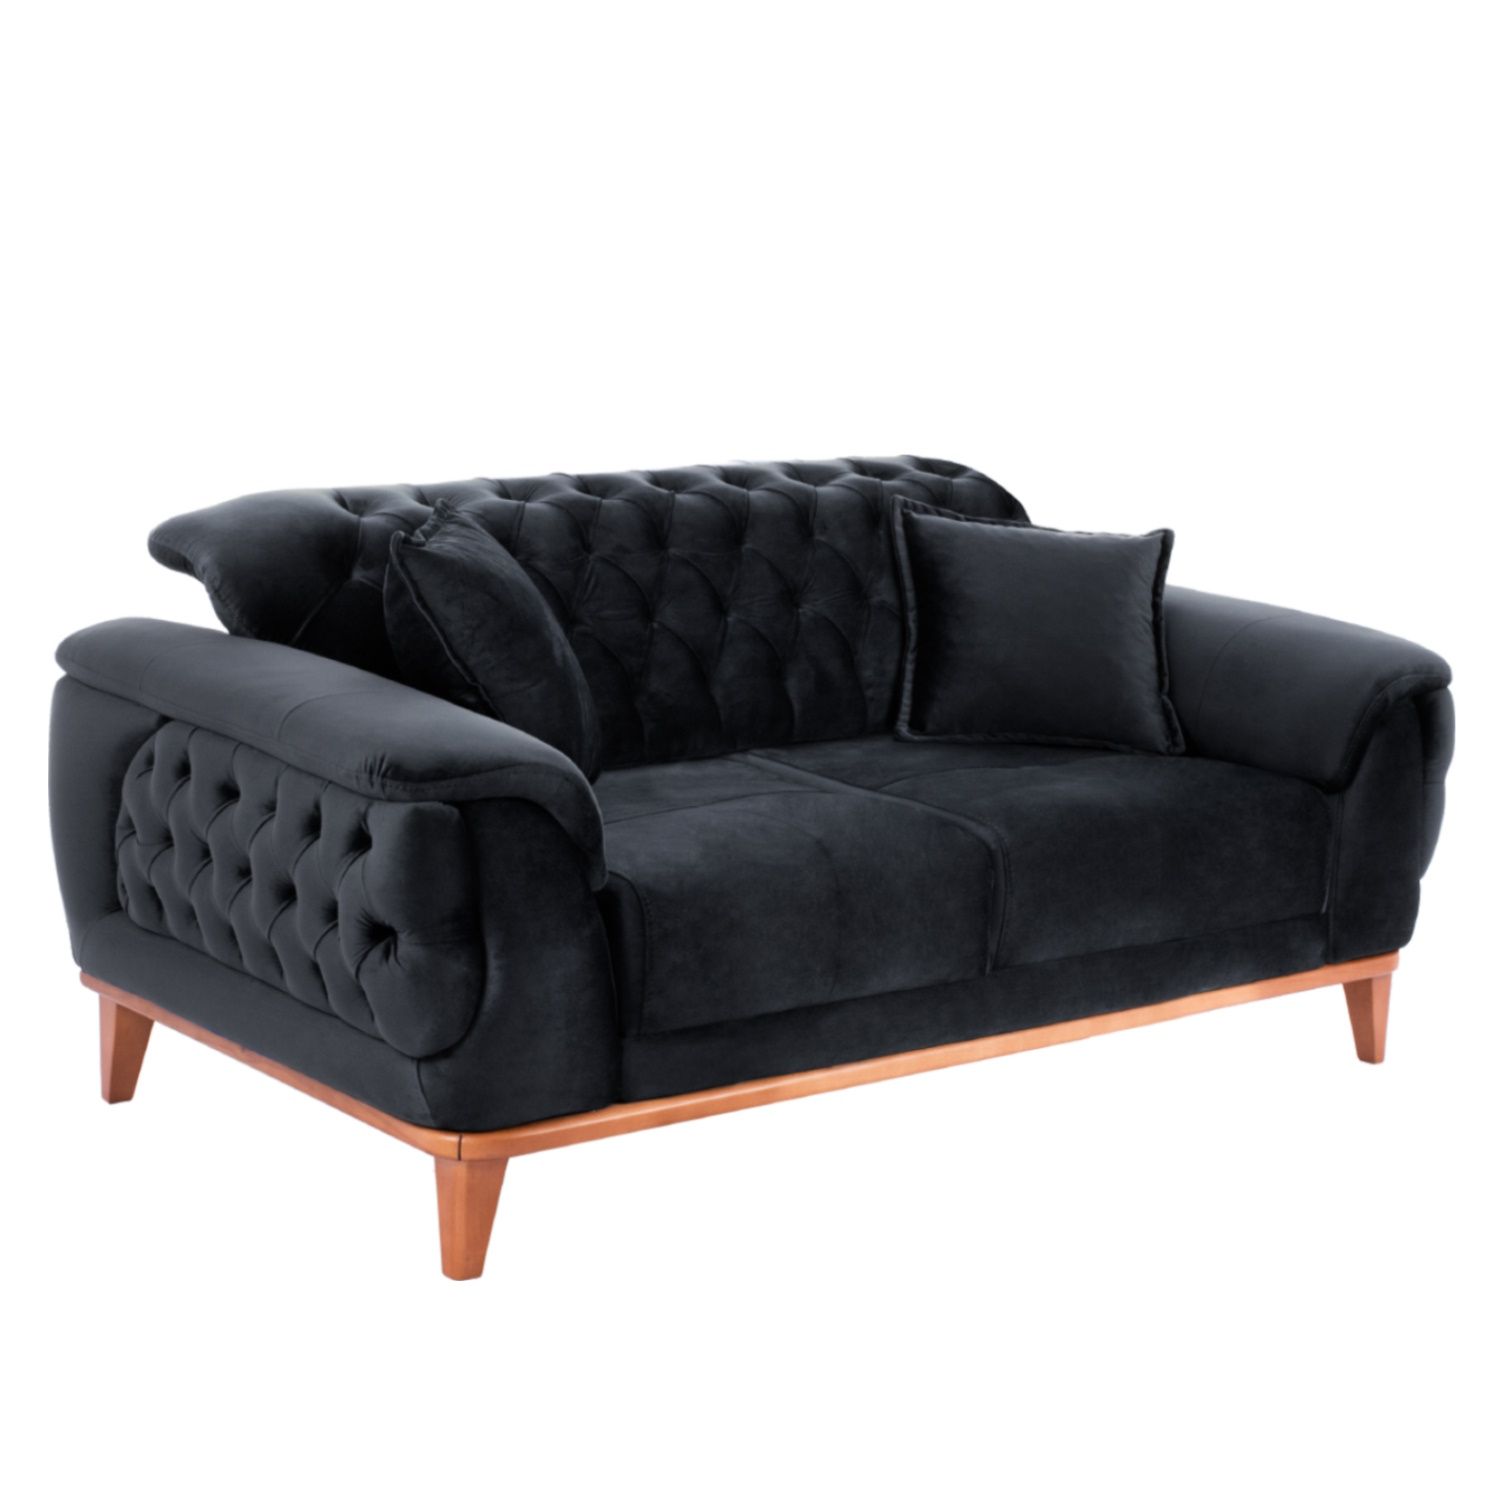 Buy Furniture Cheap ✓ Indoor & Outdoor Furniture ▷ For The Catering  Industry And Your Home ✚ Fast & Convenient ✚ Buy At The Best Price ➨ Save  Now! – 2 Seater Sofa Bed, Intended For Black Velvet 2 Seater Sofa Beds (Photo 2 of 15)